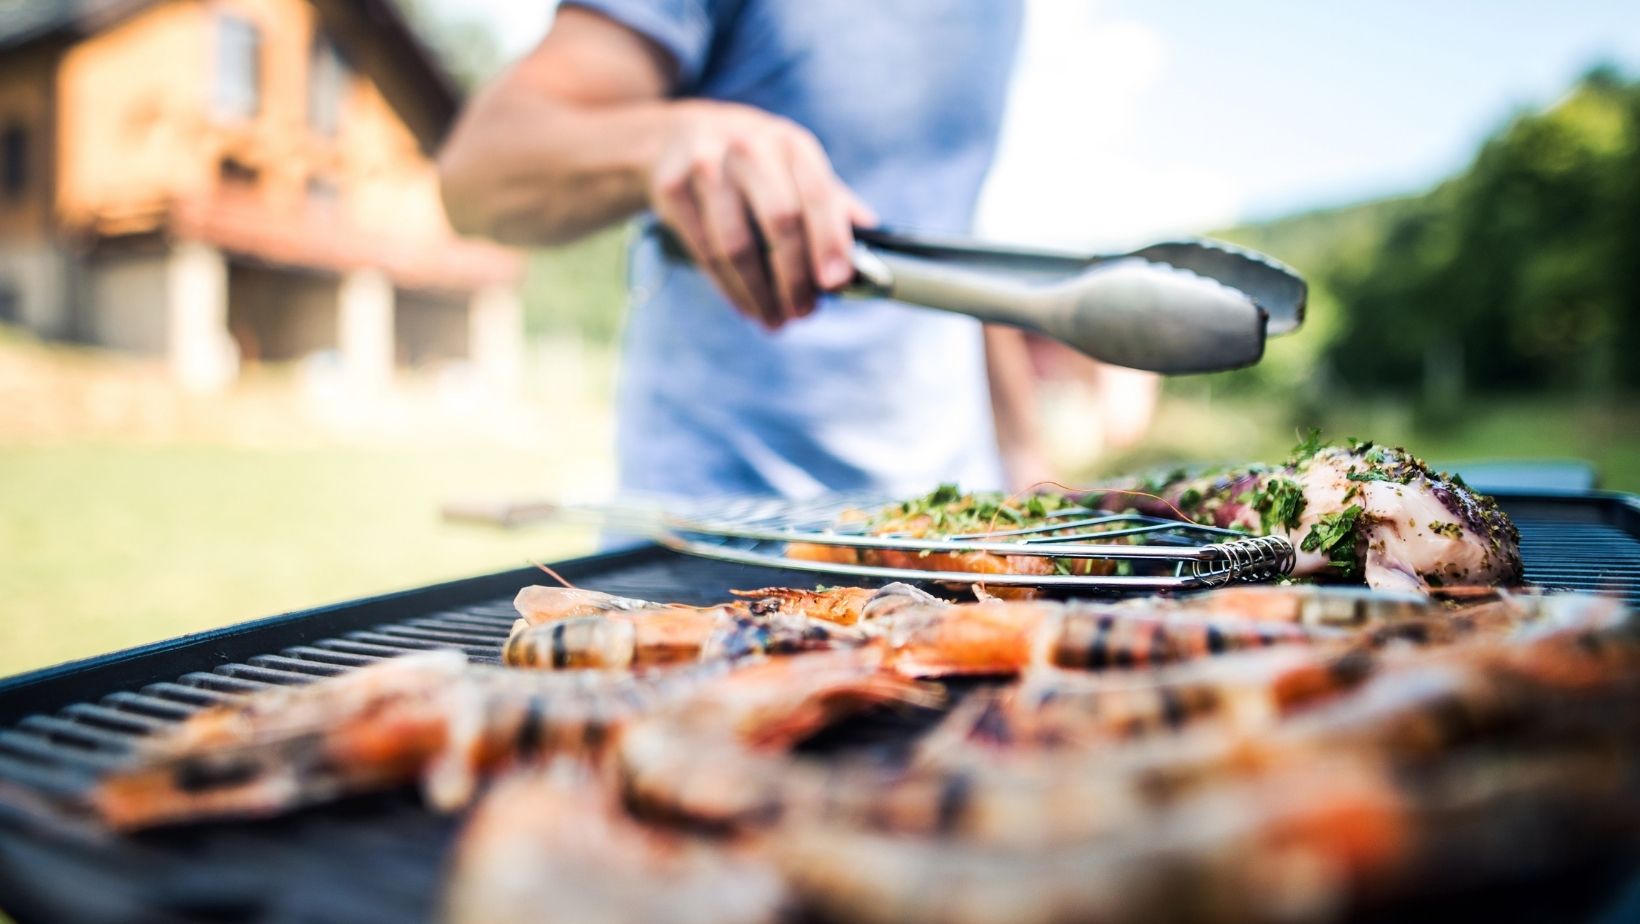 Which is the grill that best suits your needs? We help you choose it